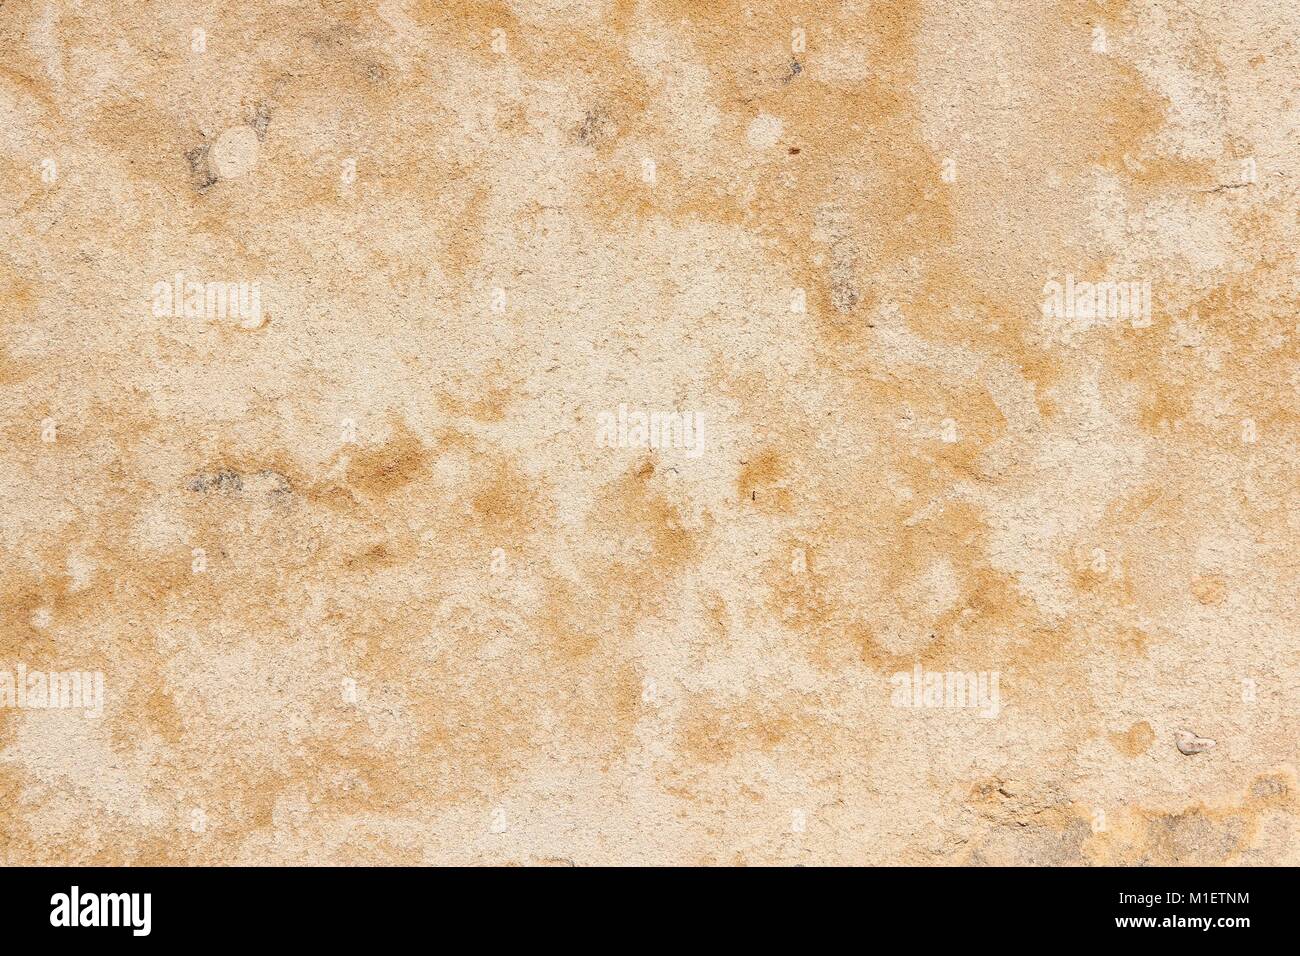 Egyptian sandstone background. Flat stone texture abstract. Stock Photo